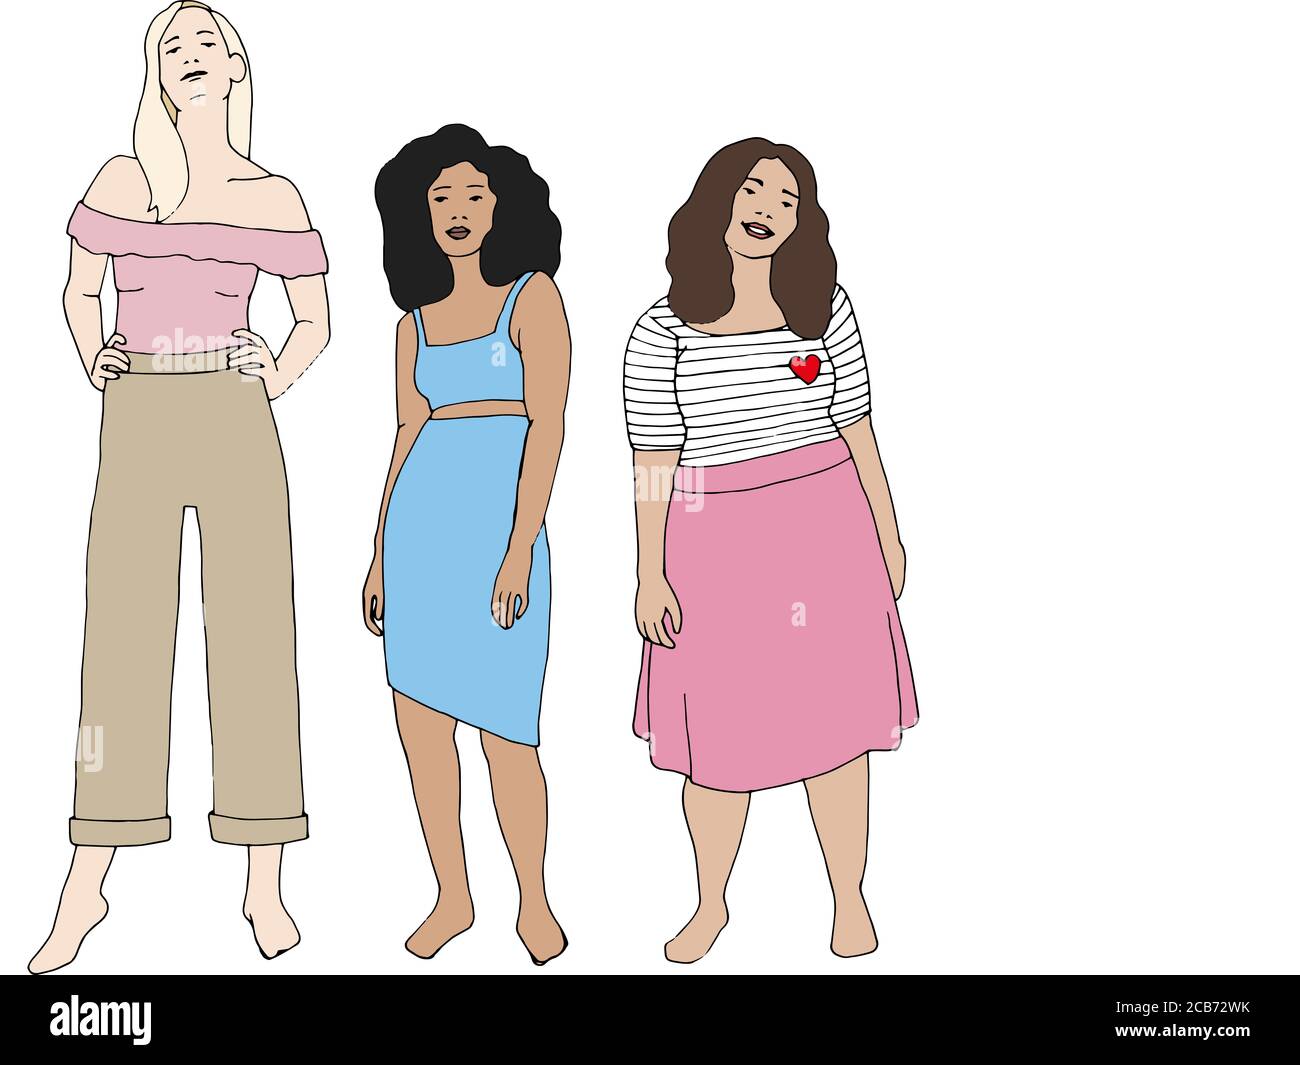 Illustration of a group of women with different body shapes. Women Diversity Stock Photo